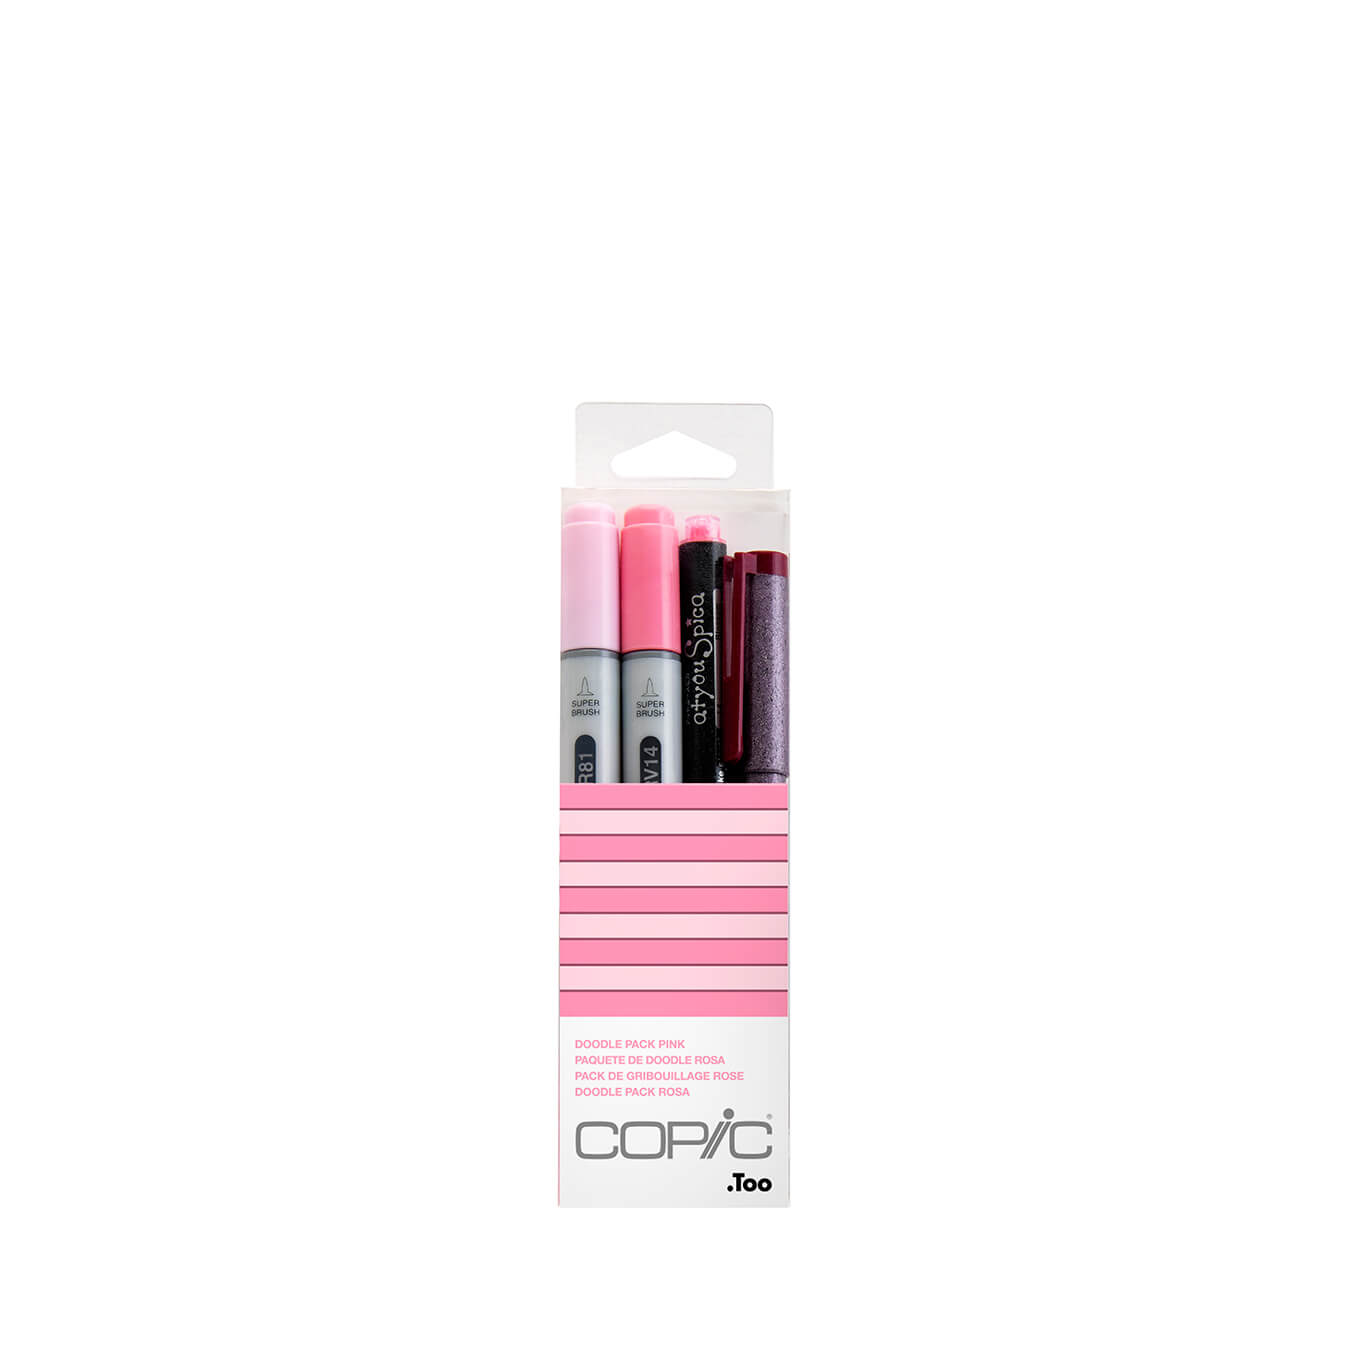 Copic Ciao Doodle pack Pink